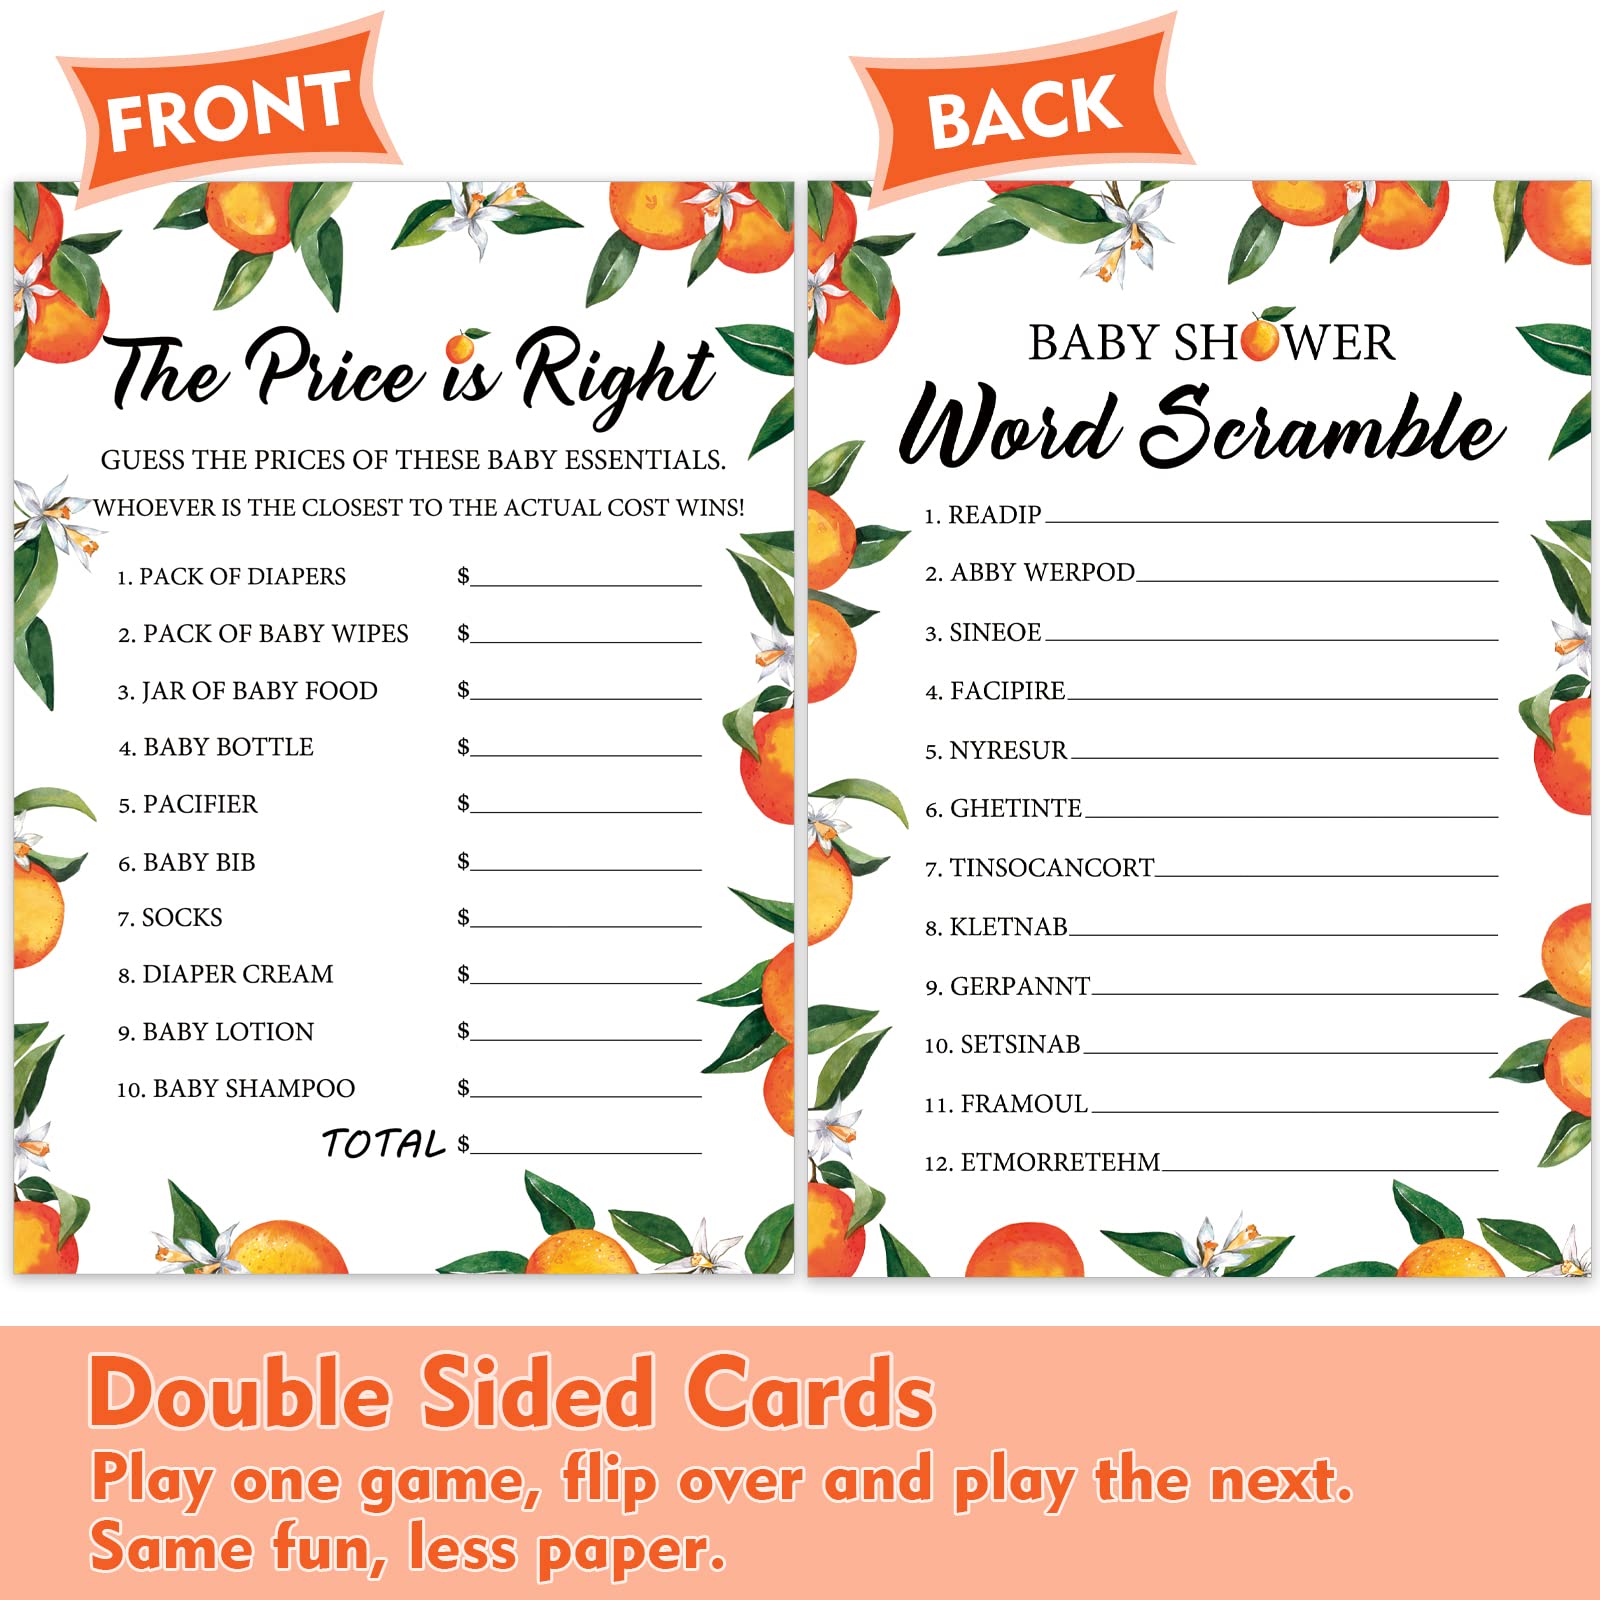 Little Cutie Orange Baby Shower Games, 4 Neutral Games, 50 Sheets Each, Fun Baby Shower Games Activities, Includes Who Knows Mommy Best, Baby Trivia, The Price is Right, and baby Word Scramble